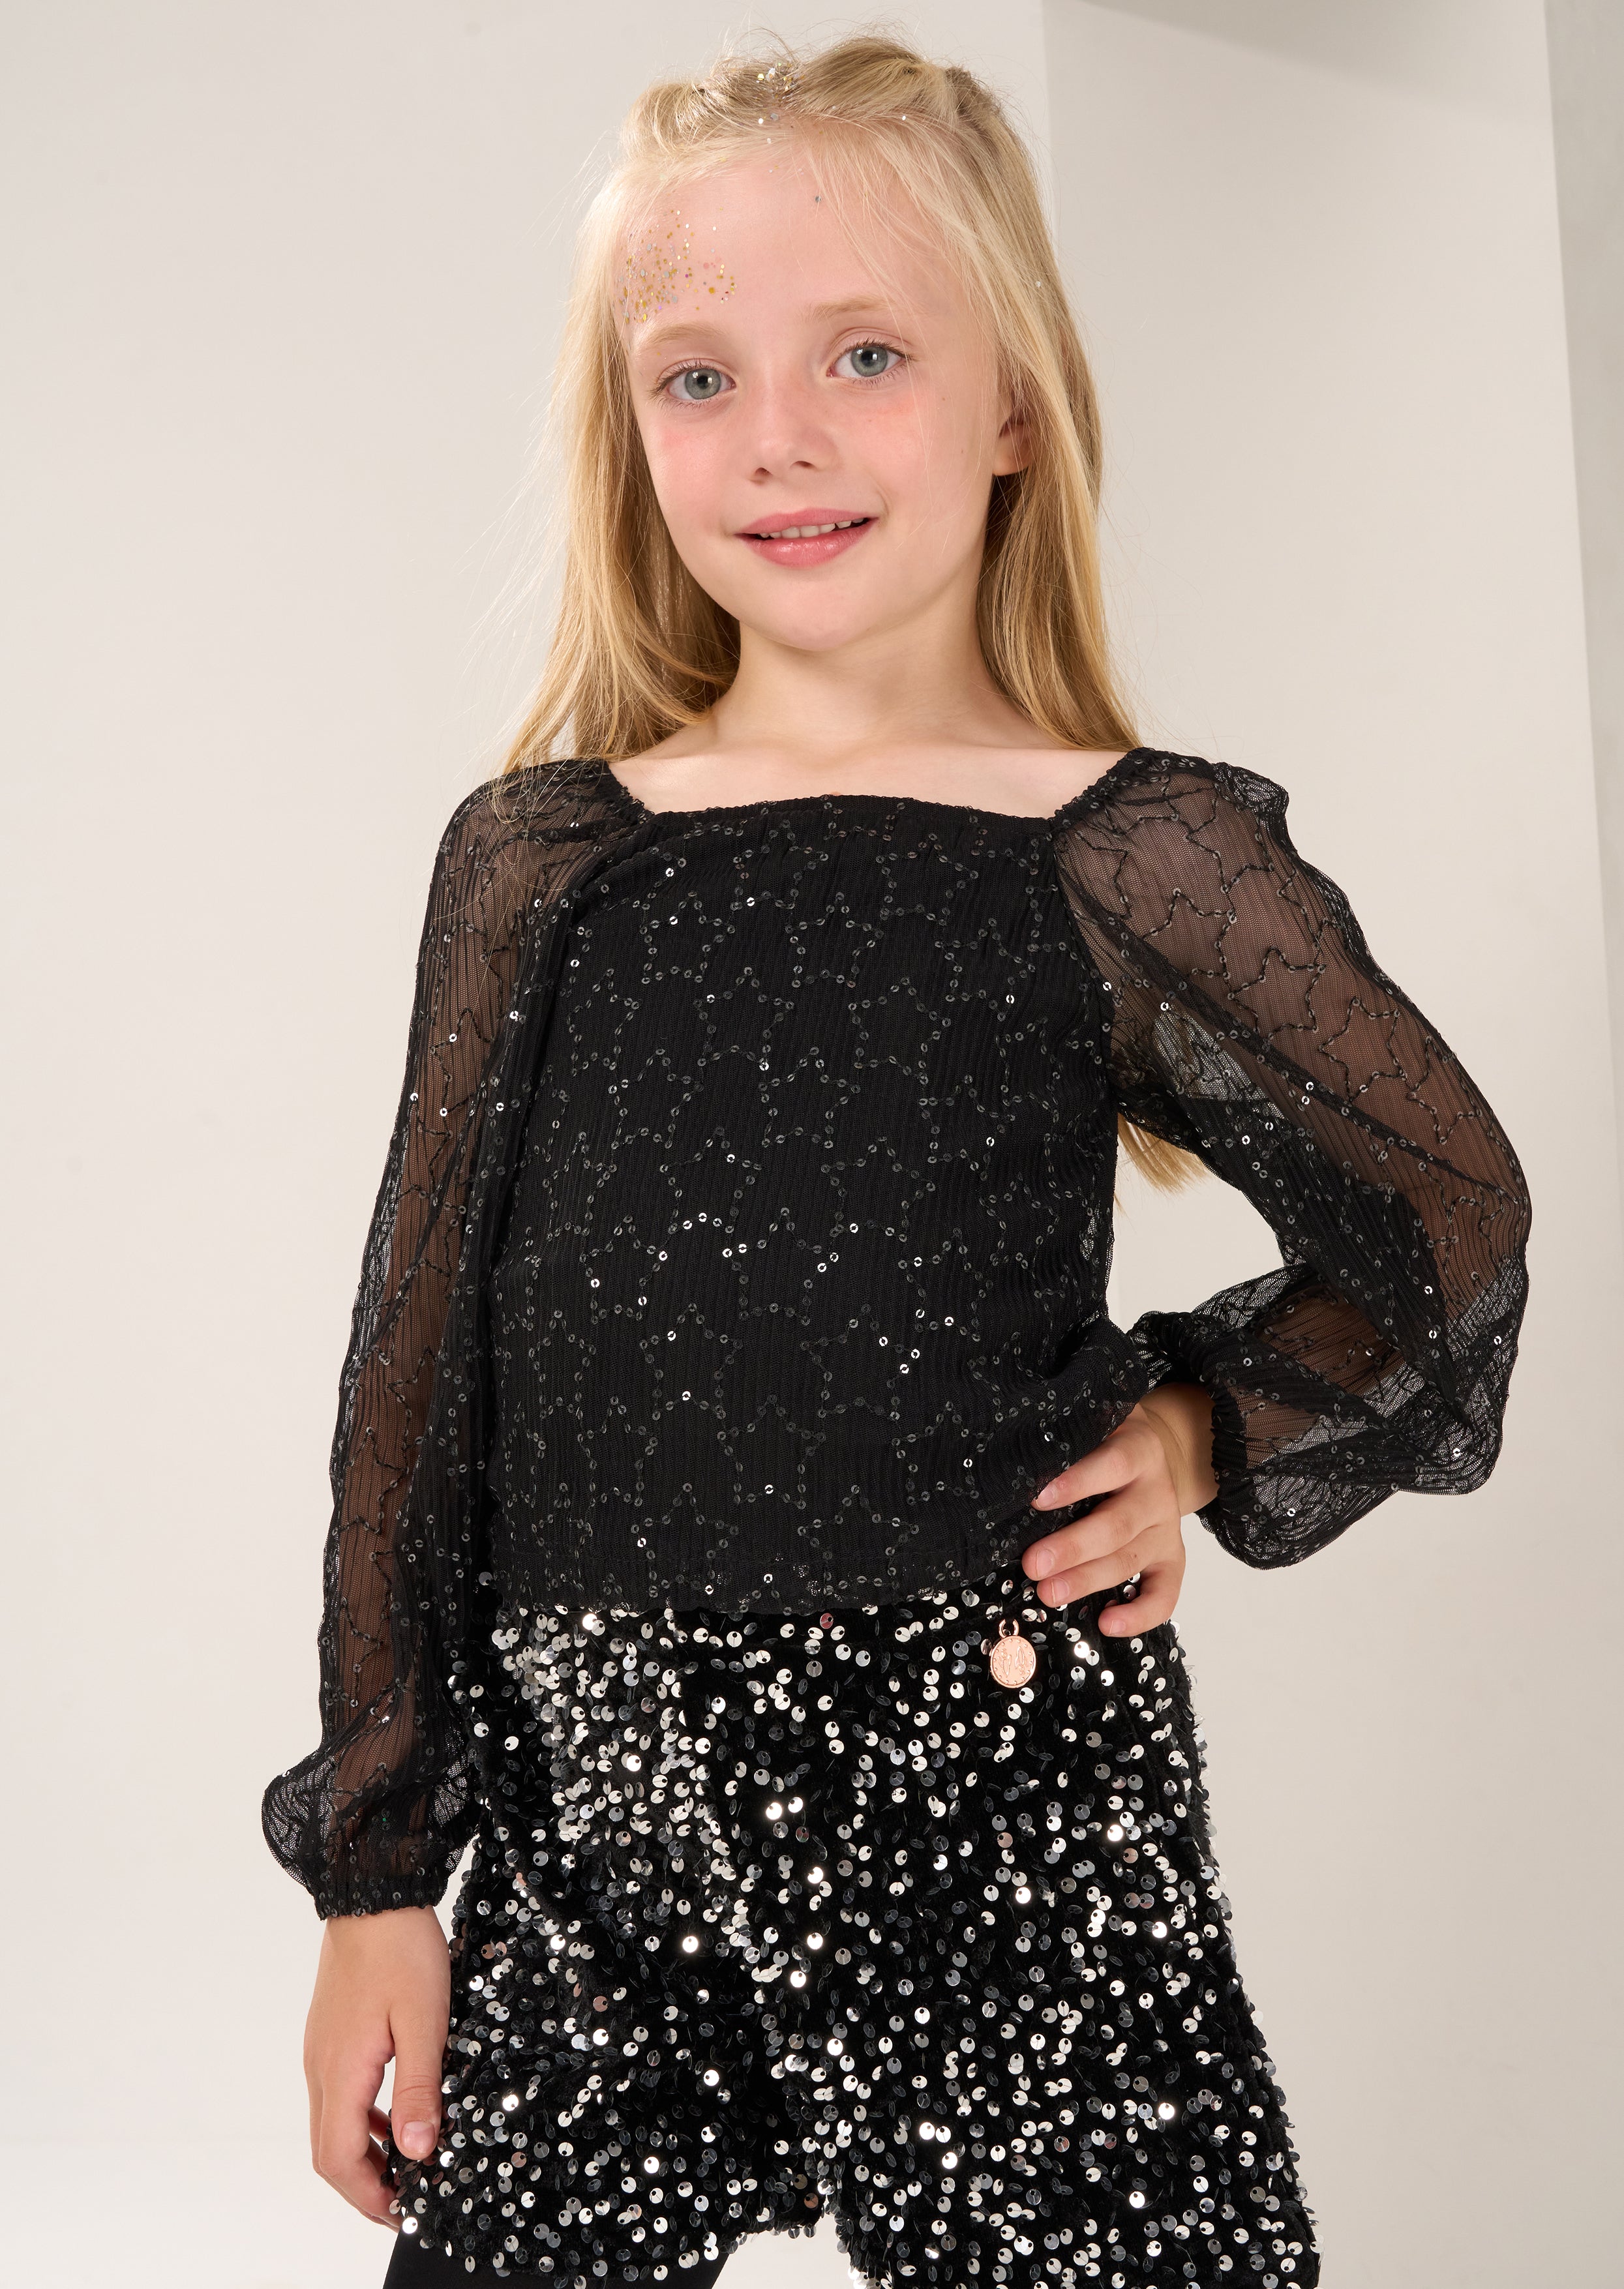 Girls Star Sequin Embellished Black Top with Cuff Sleeves